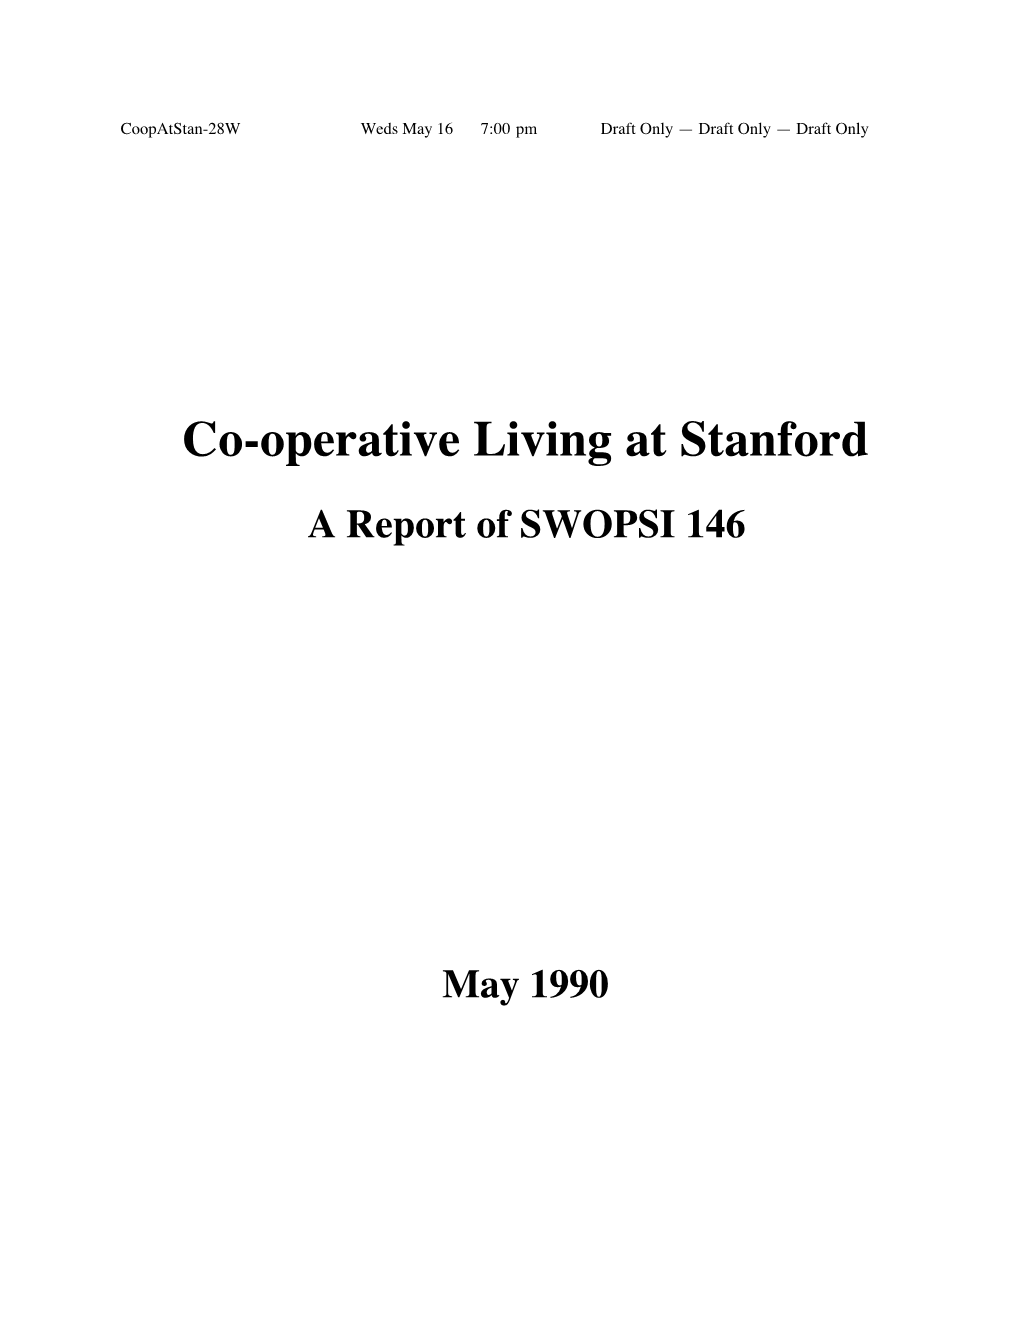 Co-Operative Living at Stanford a Report of SWOPSI 146